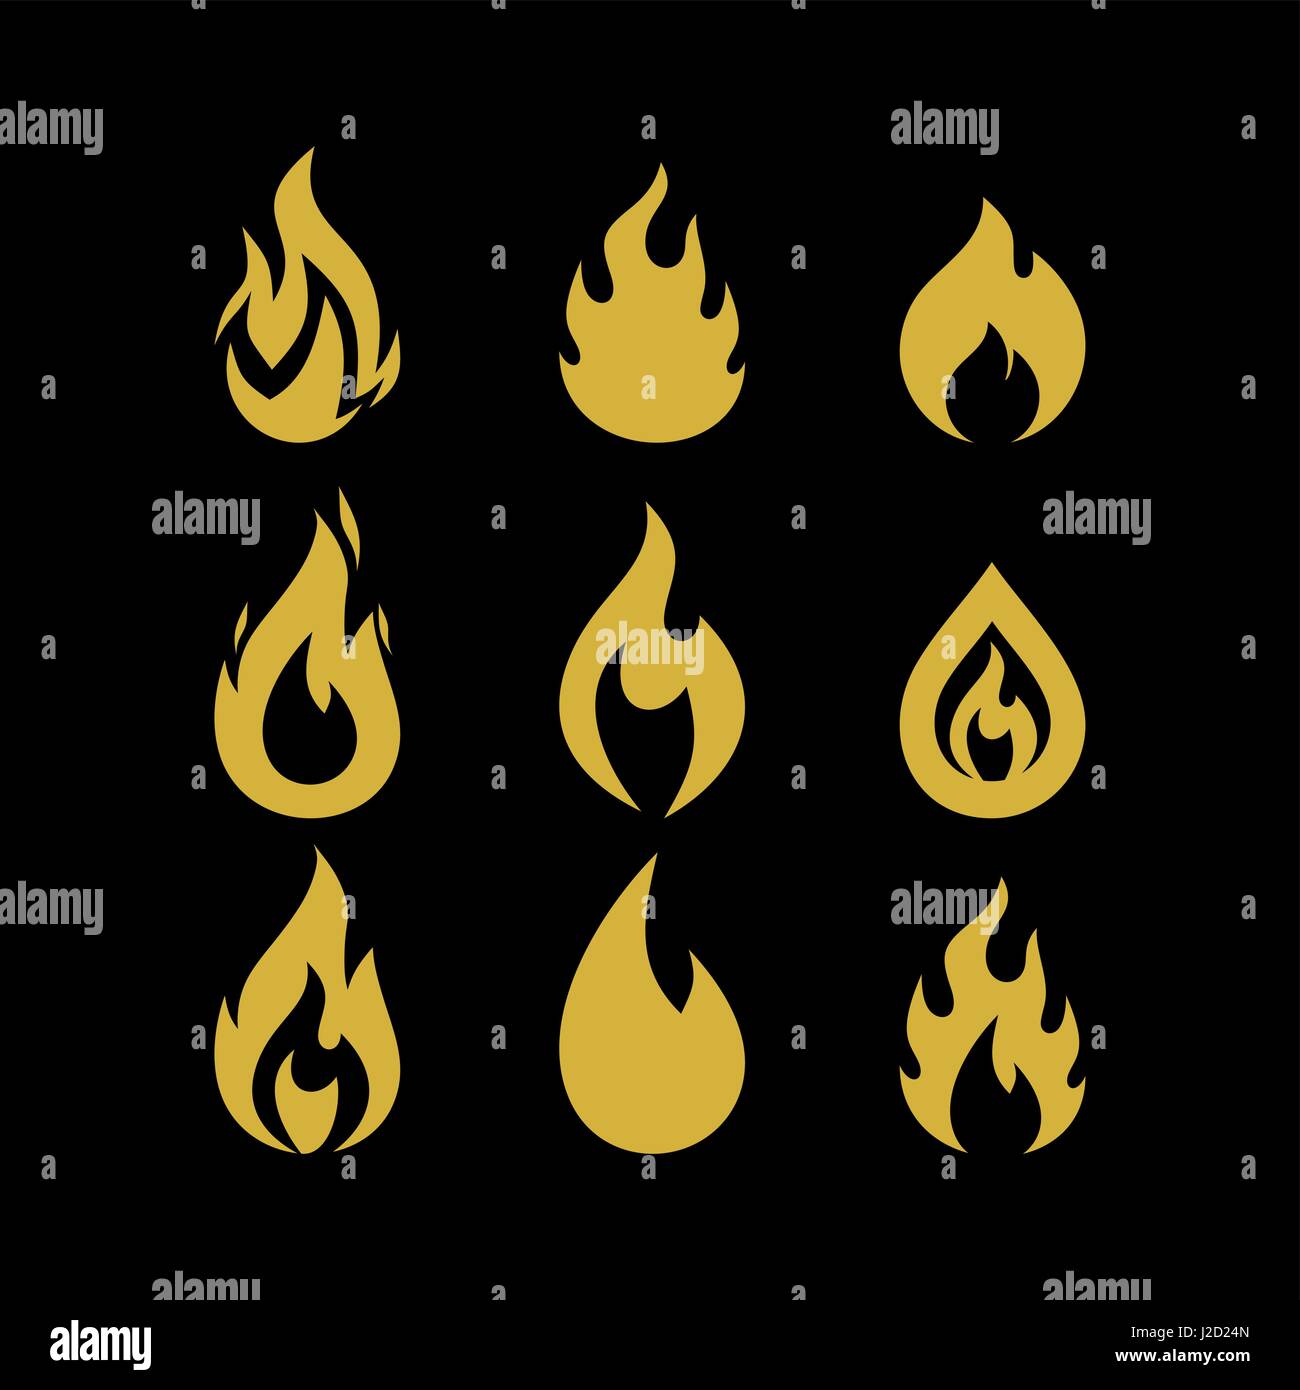 Big set of vector flames, collection of design elements for creating logos. Stock Vector